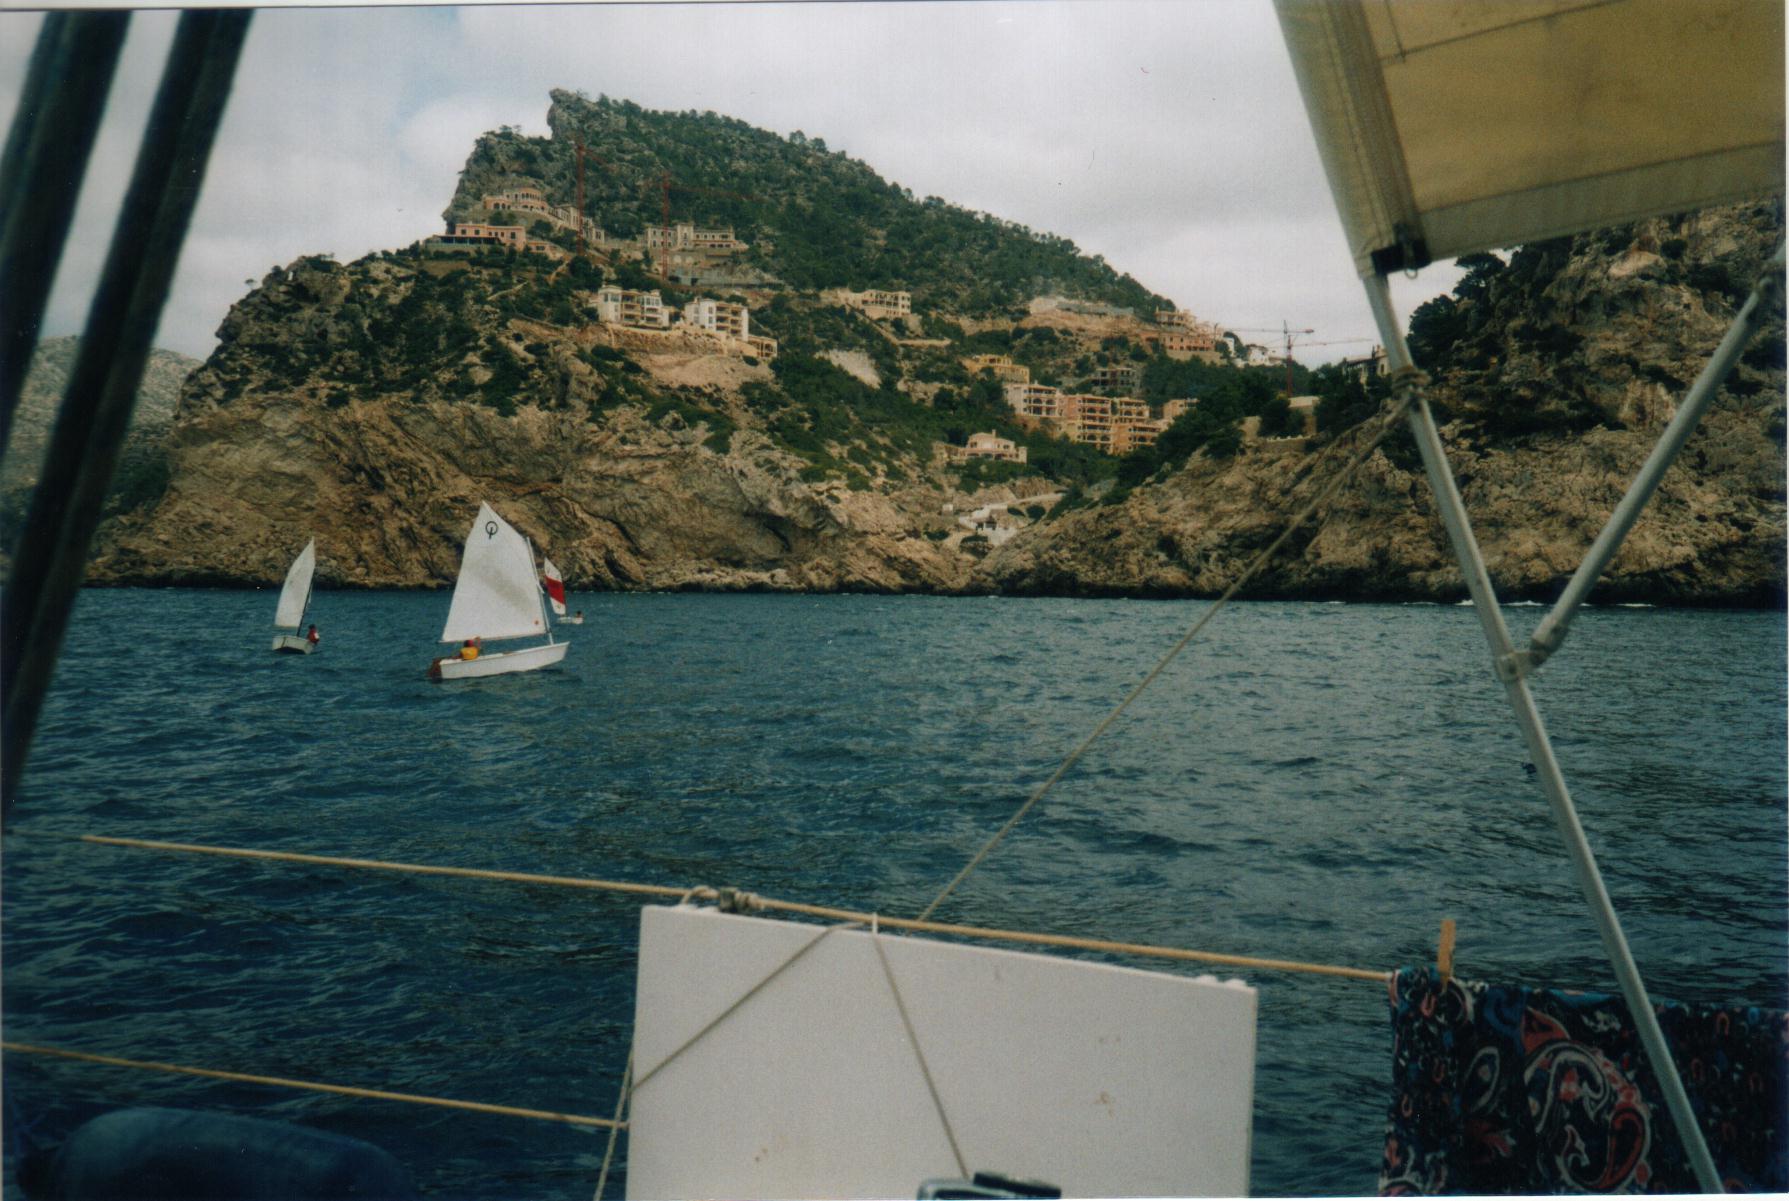 BAY IN THE SOUTH OF IBIZA ISLAND